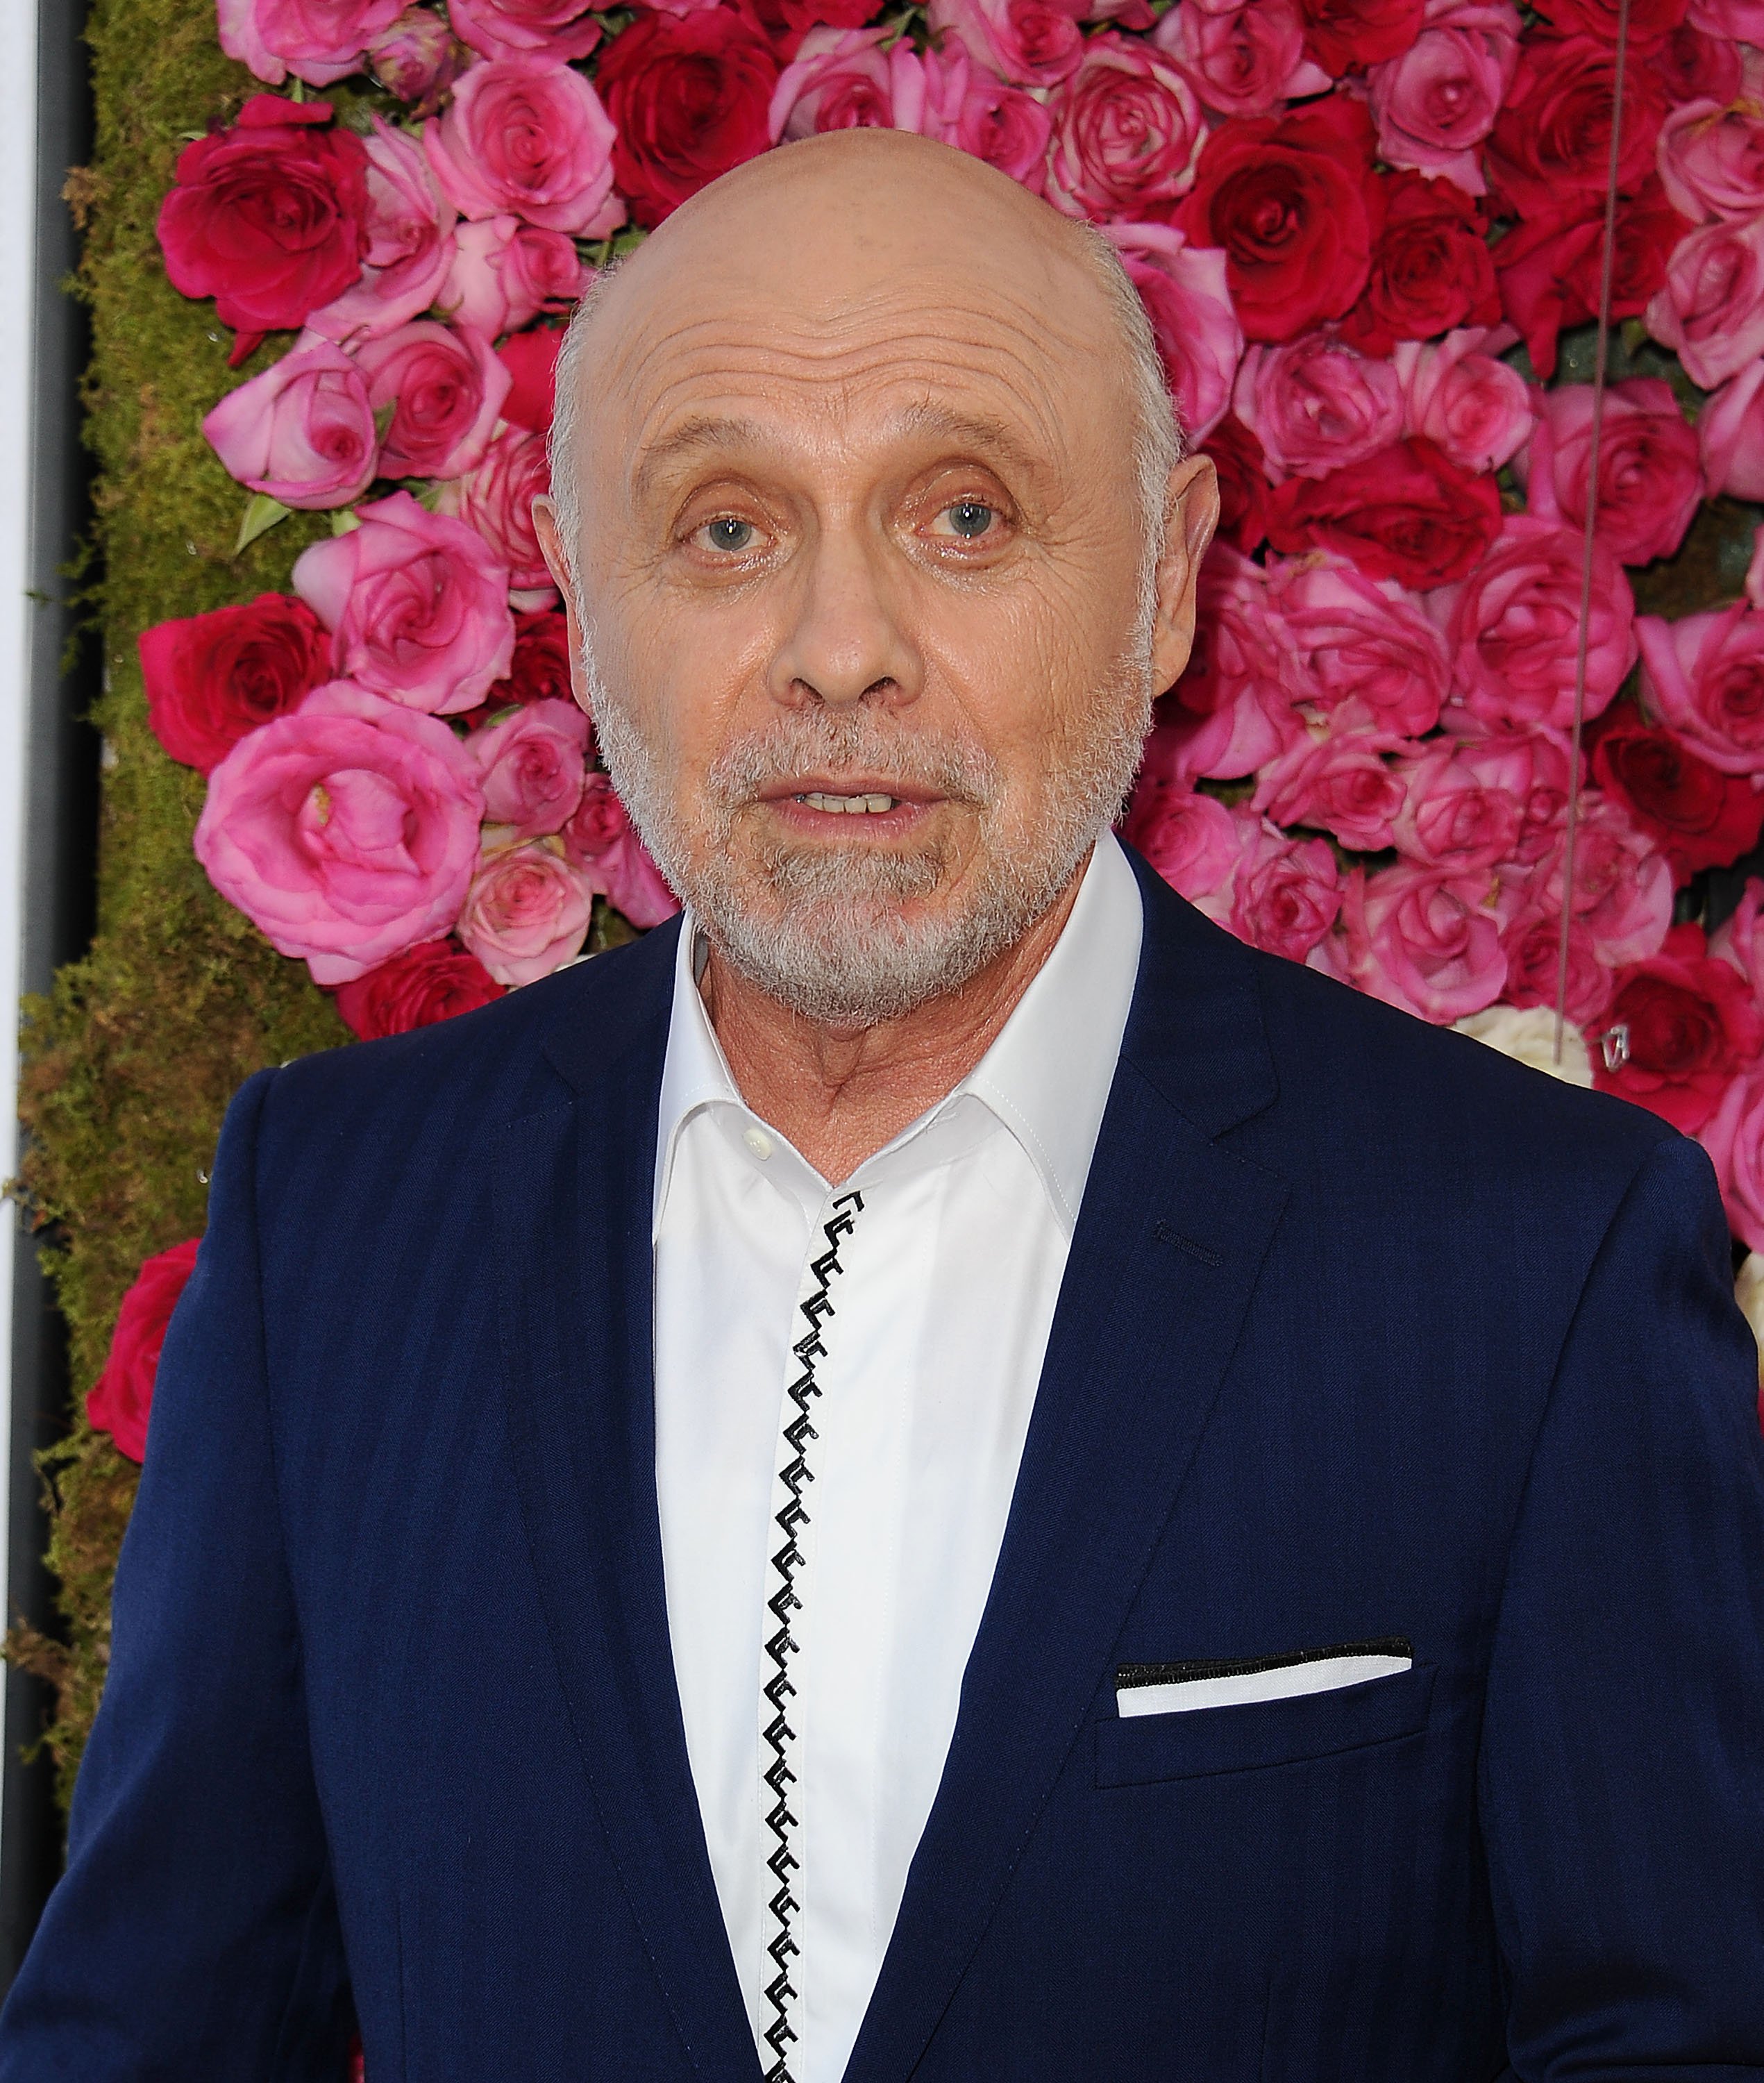 Hector Elizondo at TCL Chinese Theatre IMAX on April 13, 2016 in Hollywood, California. | Source: Getty Images